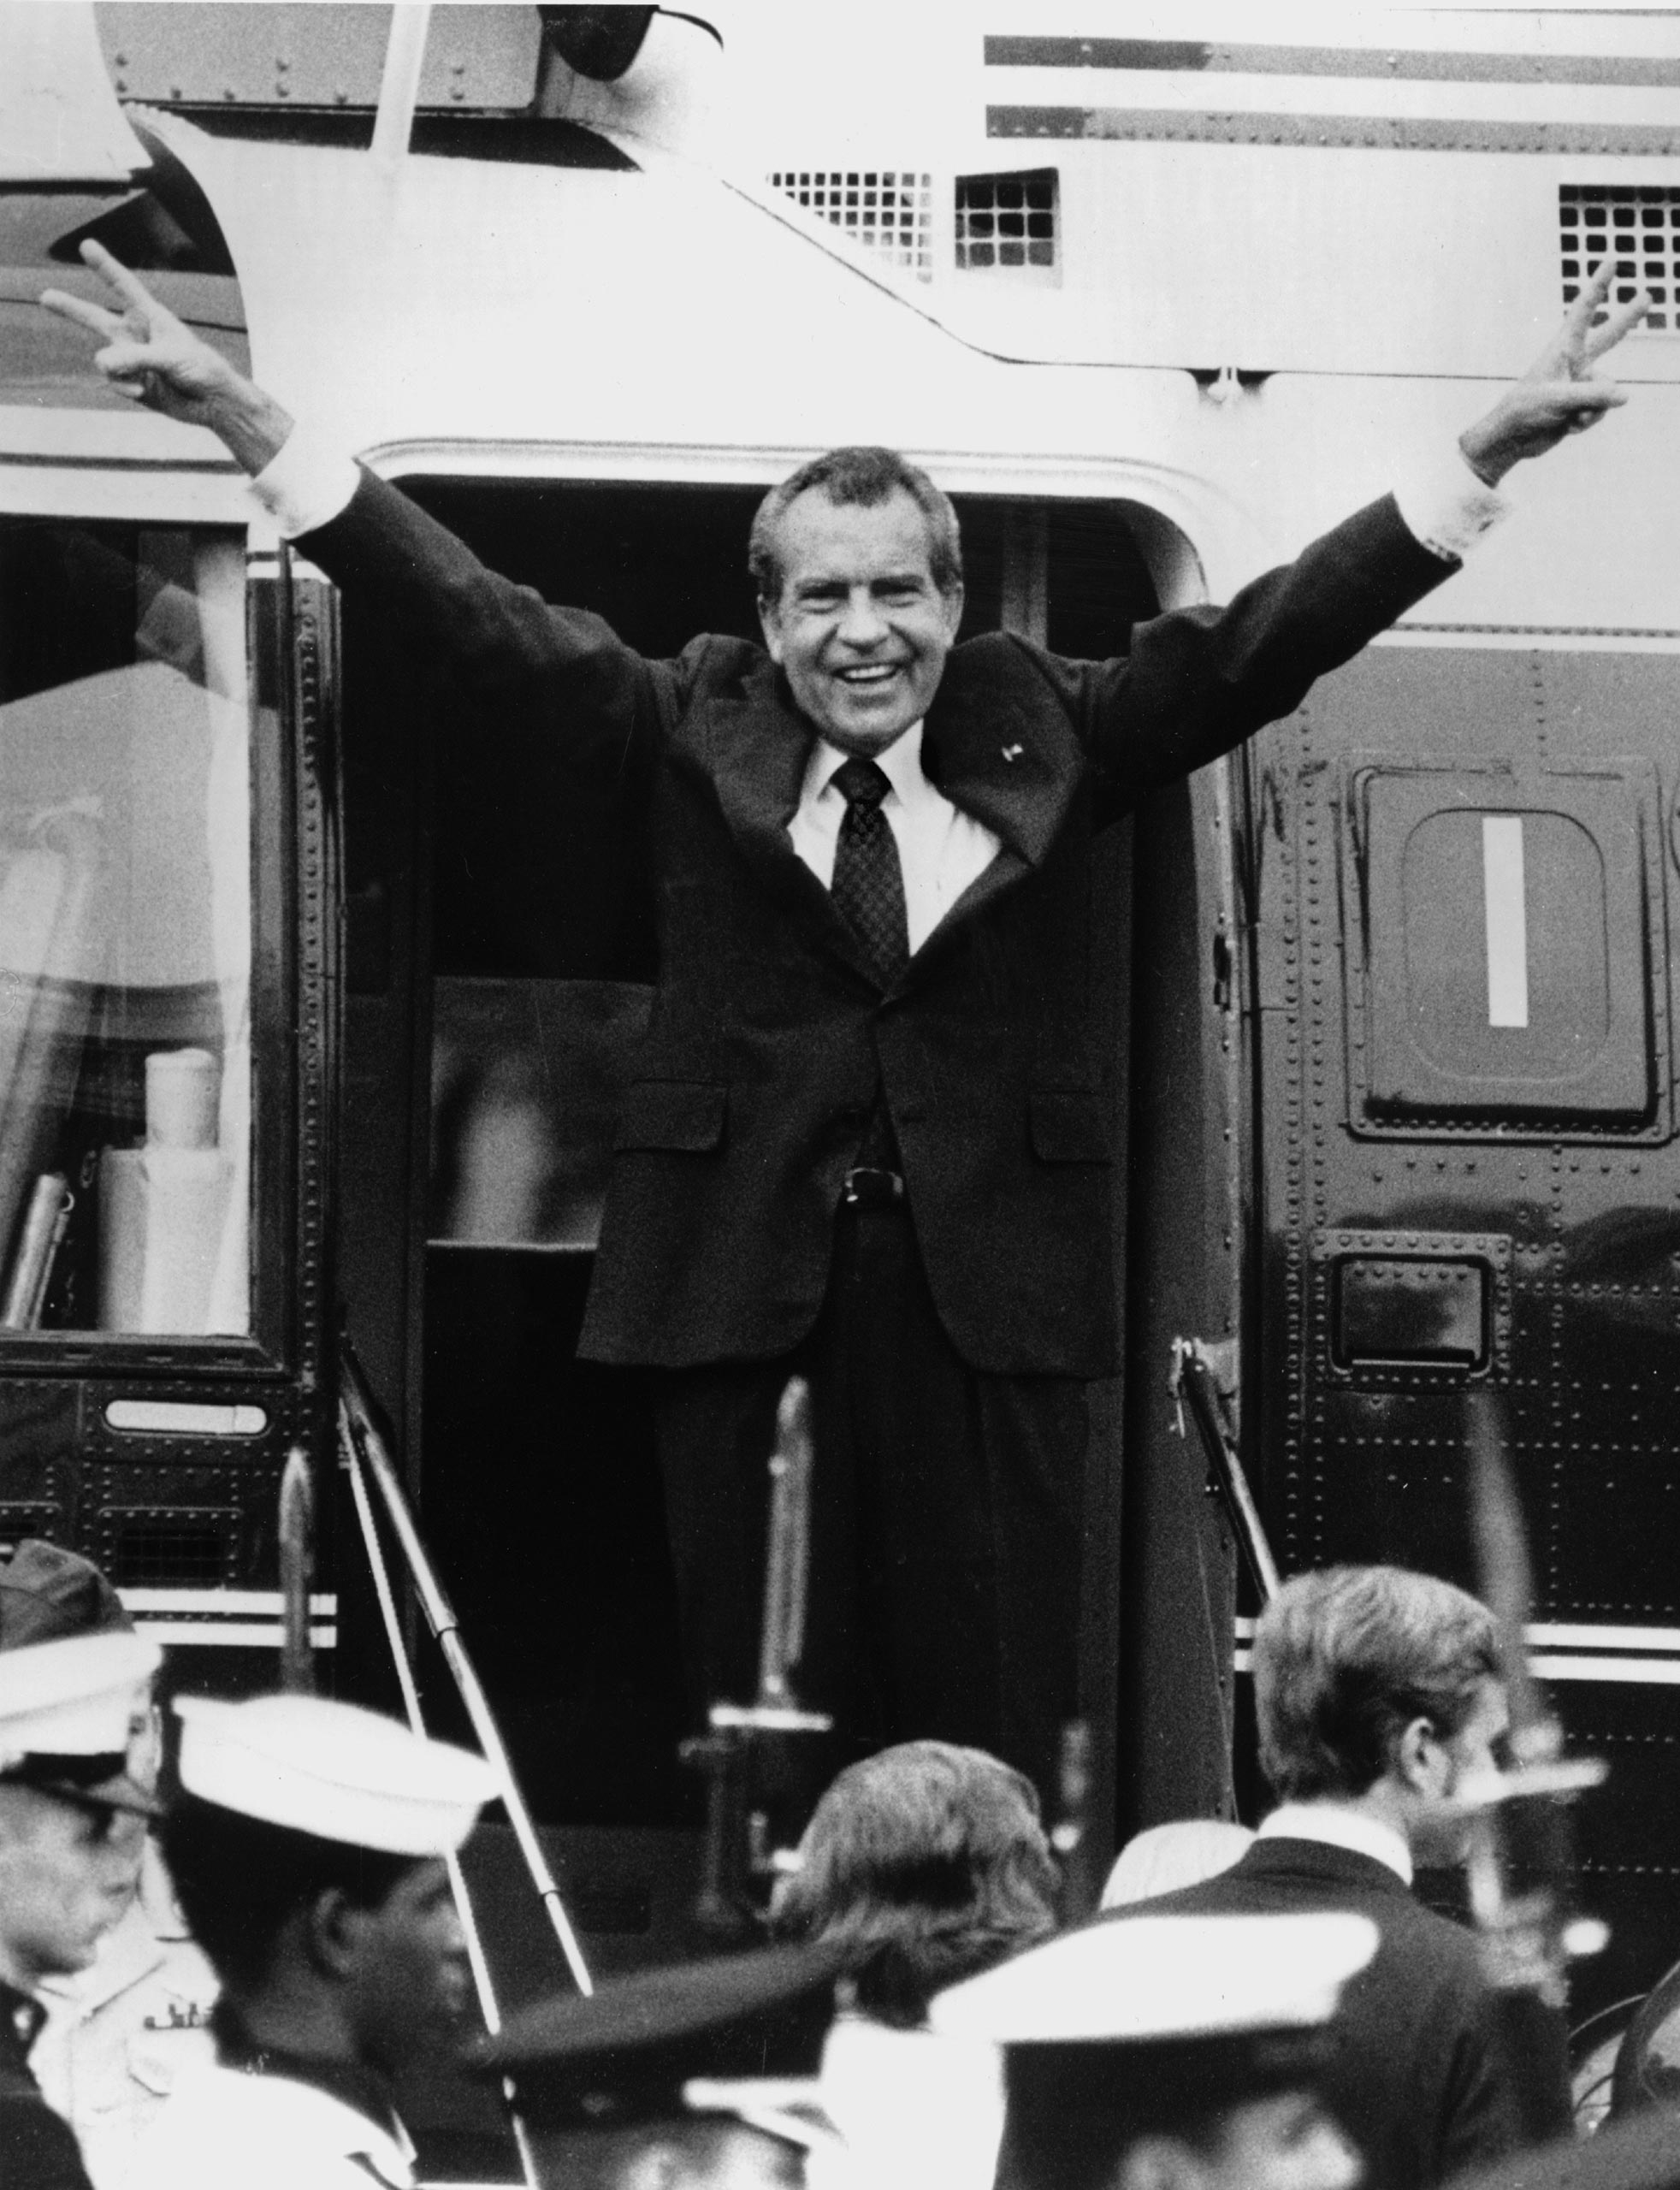 Richard Nixon says goodbye with a victorious salute to his staff members outside the White House as he boards a helicopter after resigning the presidency on Aug. 9, 1974.